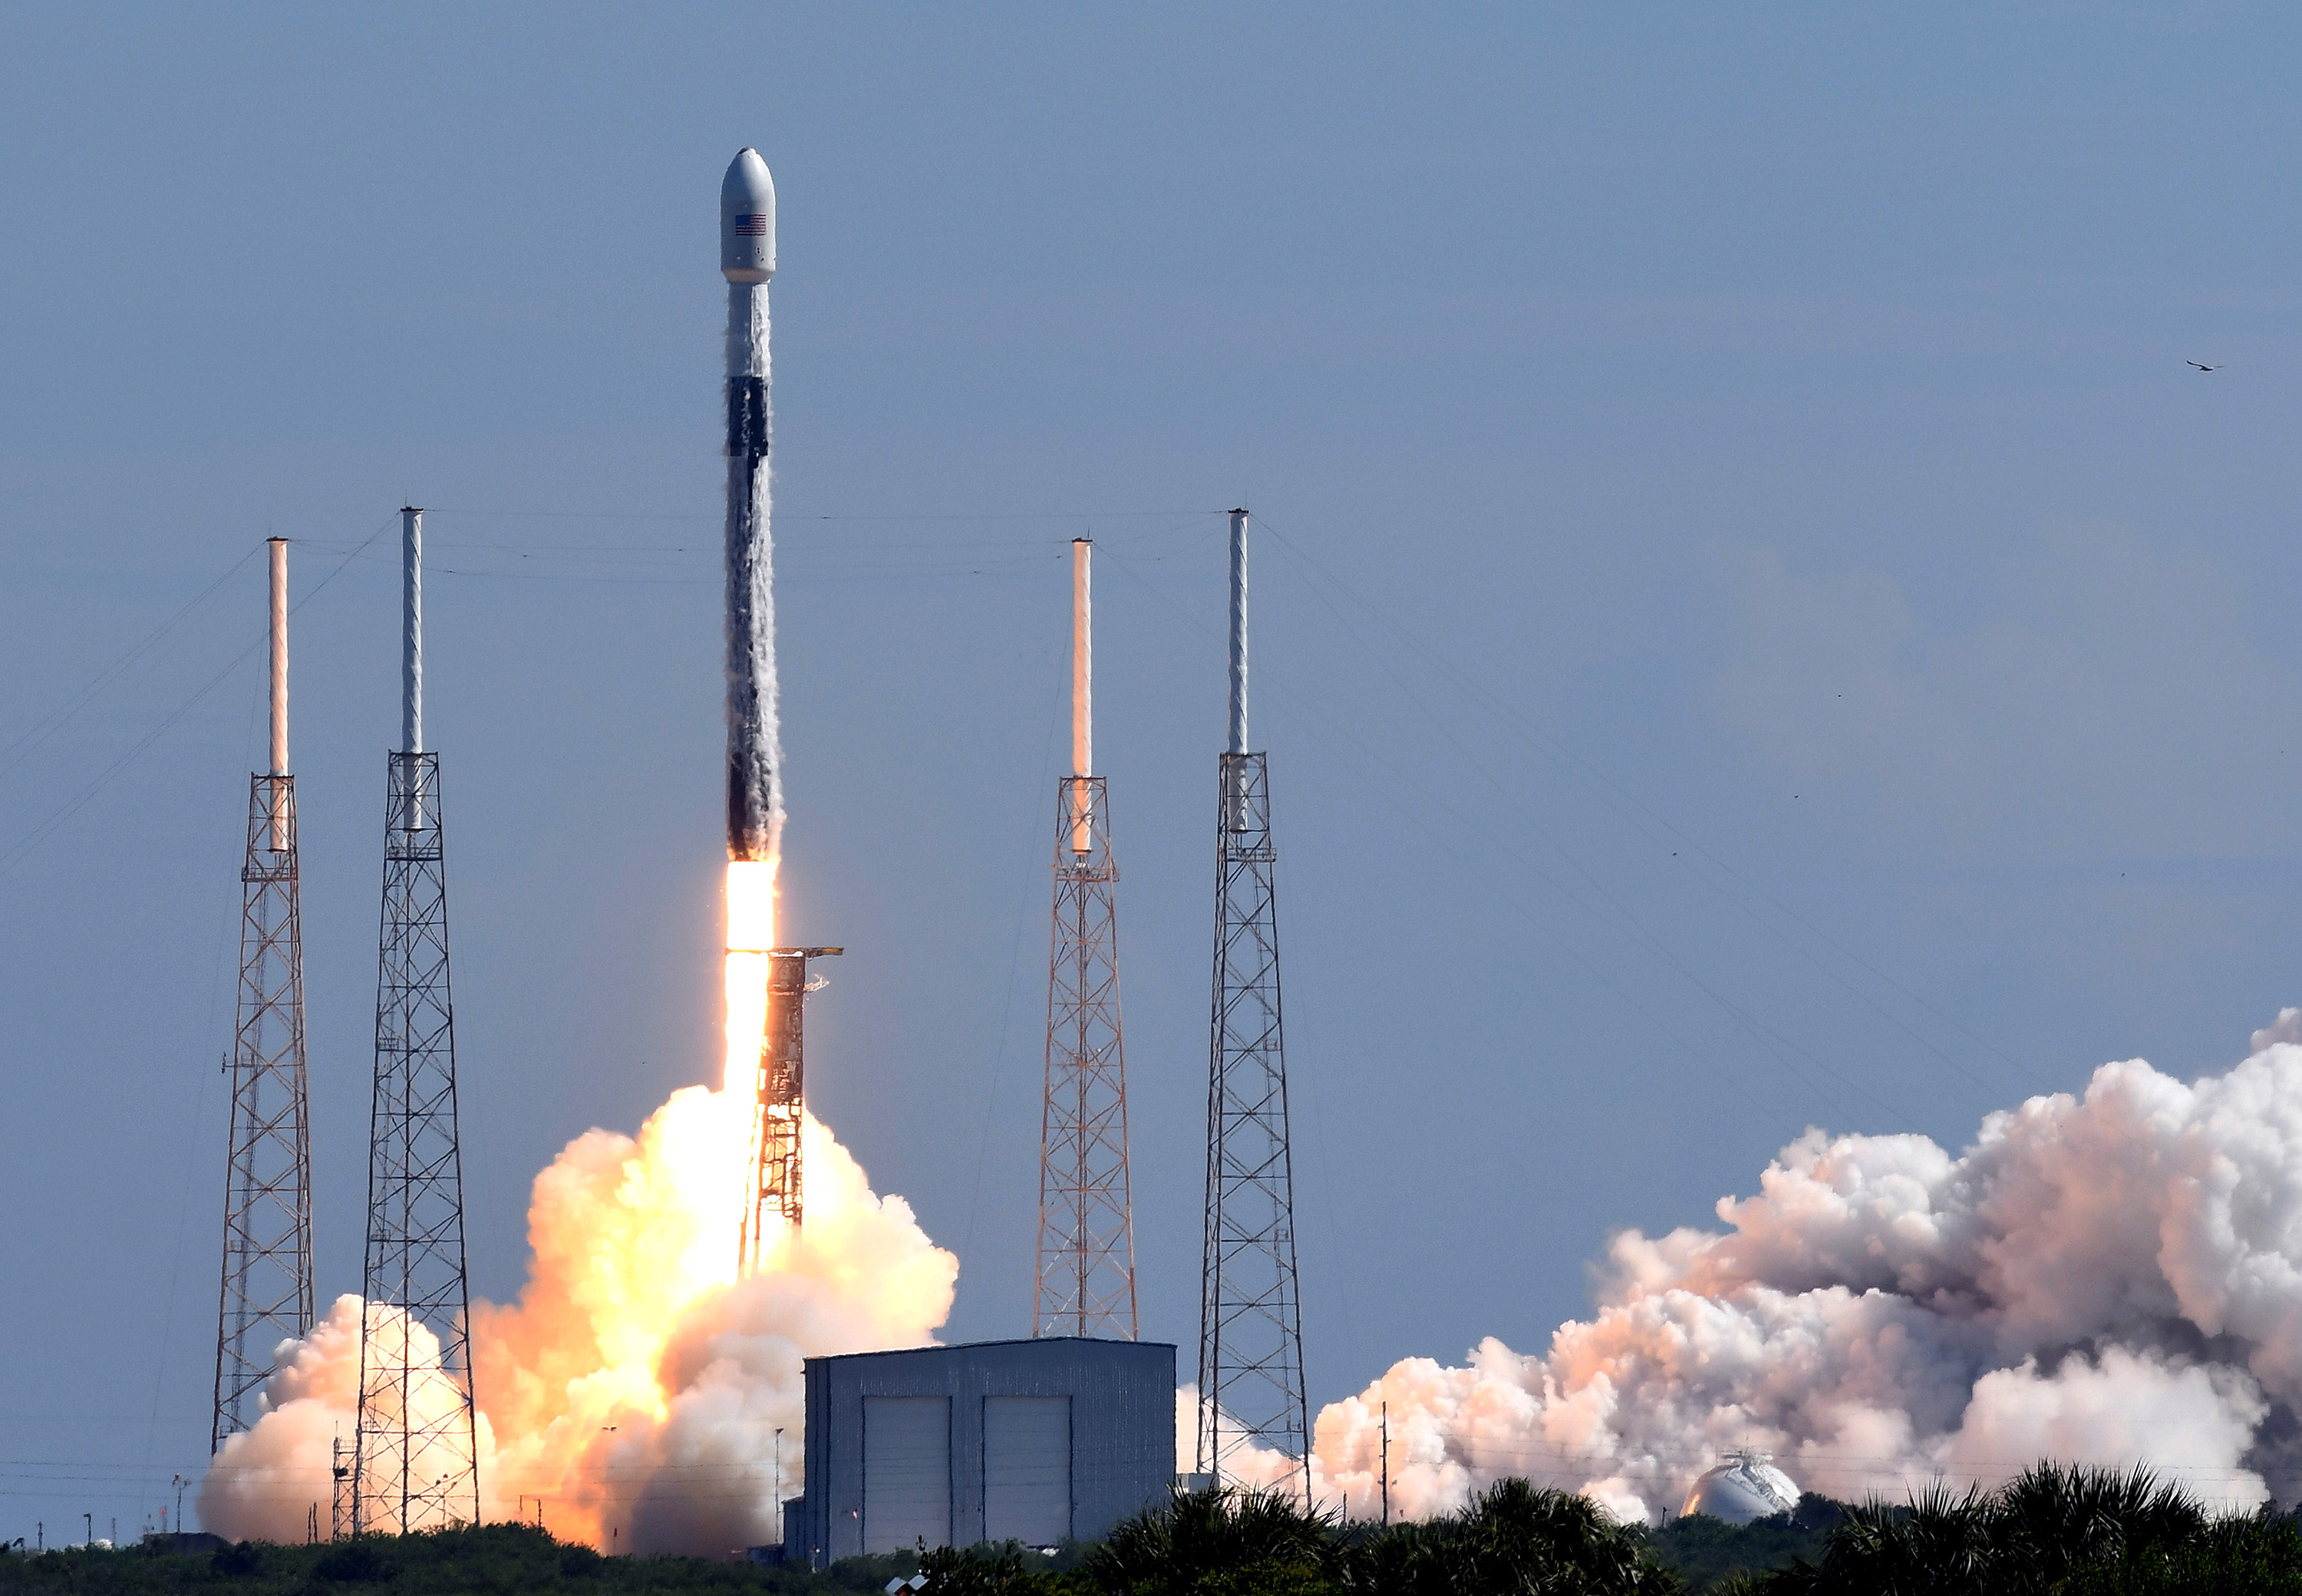 A SpaceX Falcon 9 rocket carrying 58 satellites for SpaceX's Starlink broadband internet network will be launched on August 18.